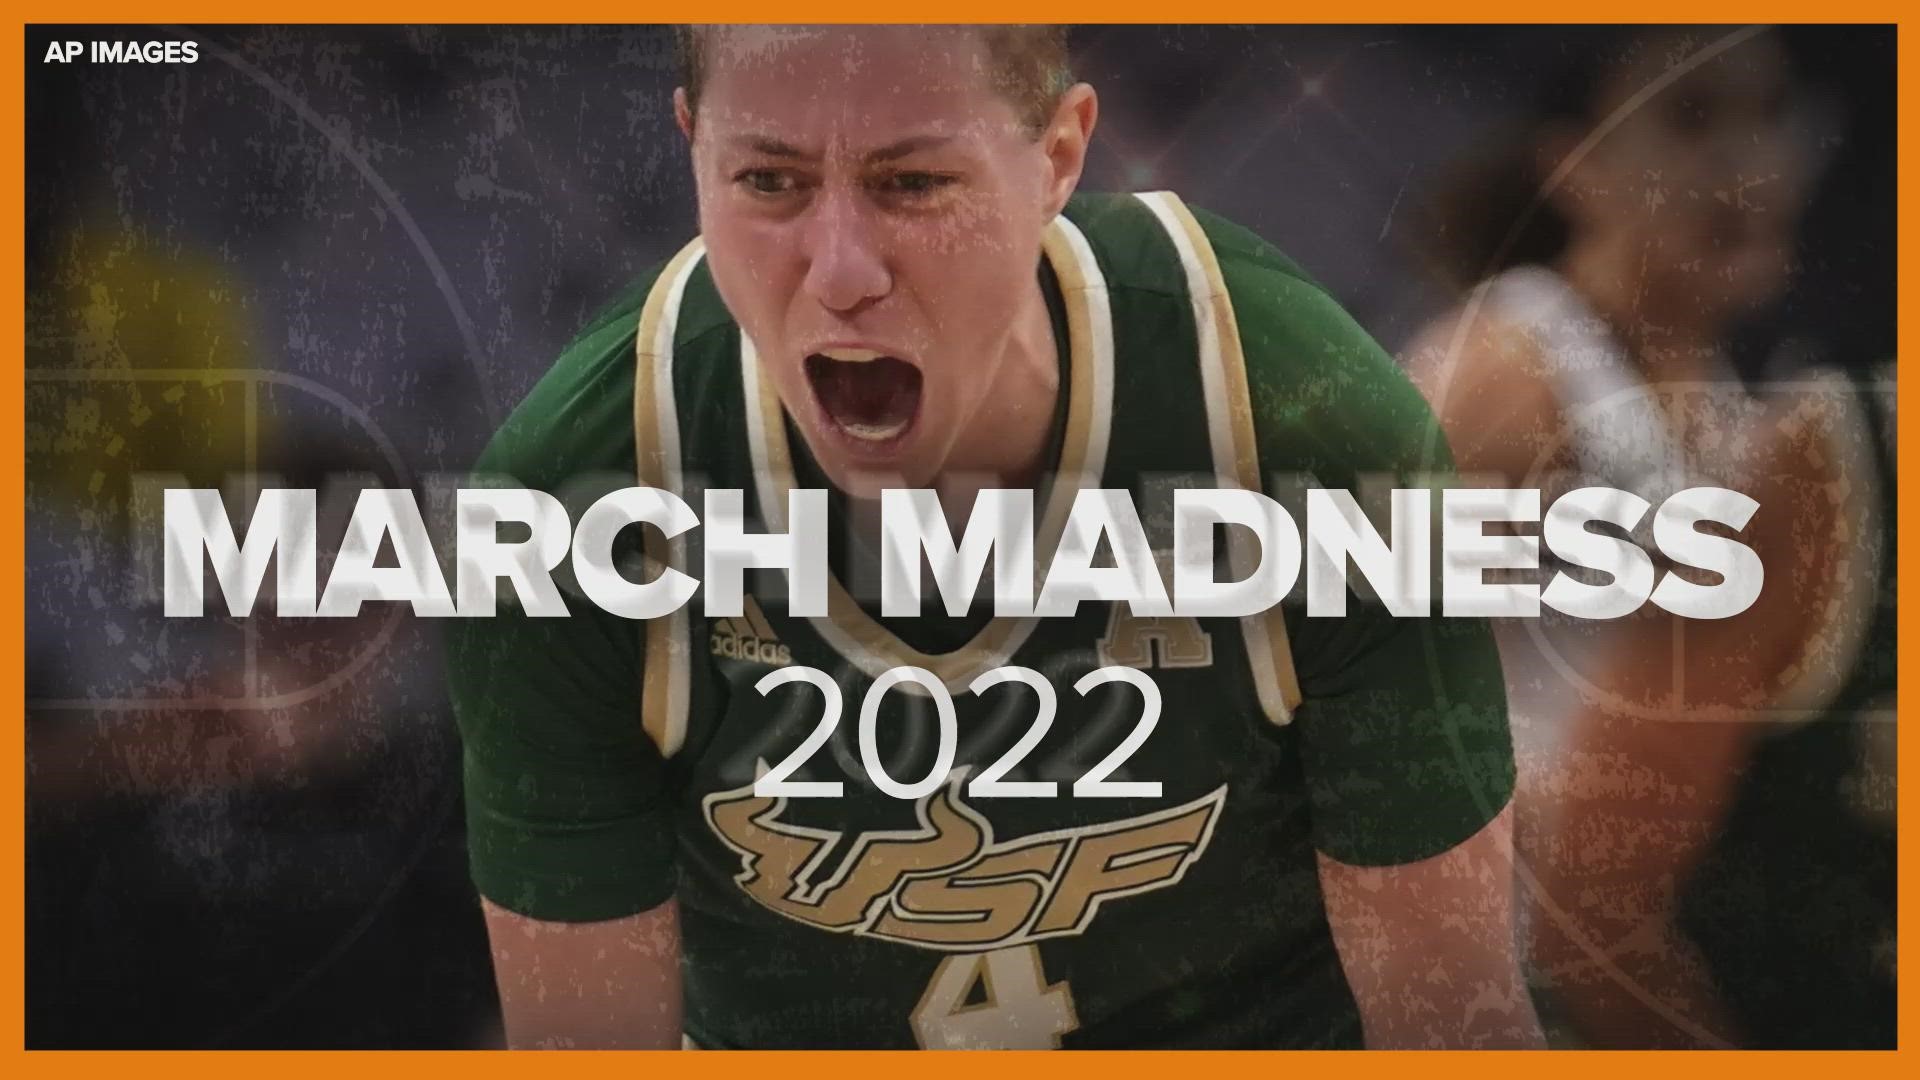 When does March Madness 2022 begin? kagstv